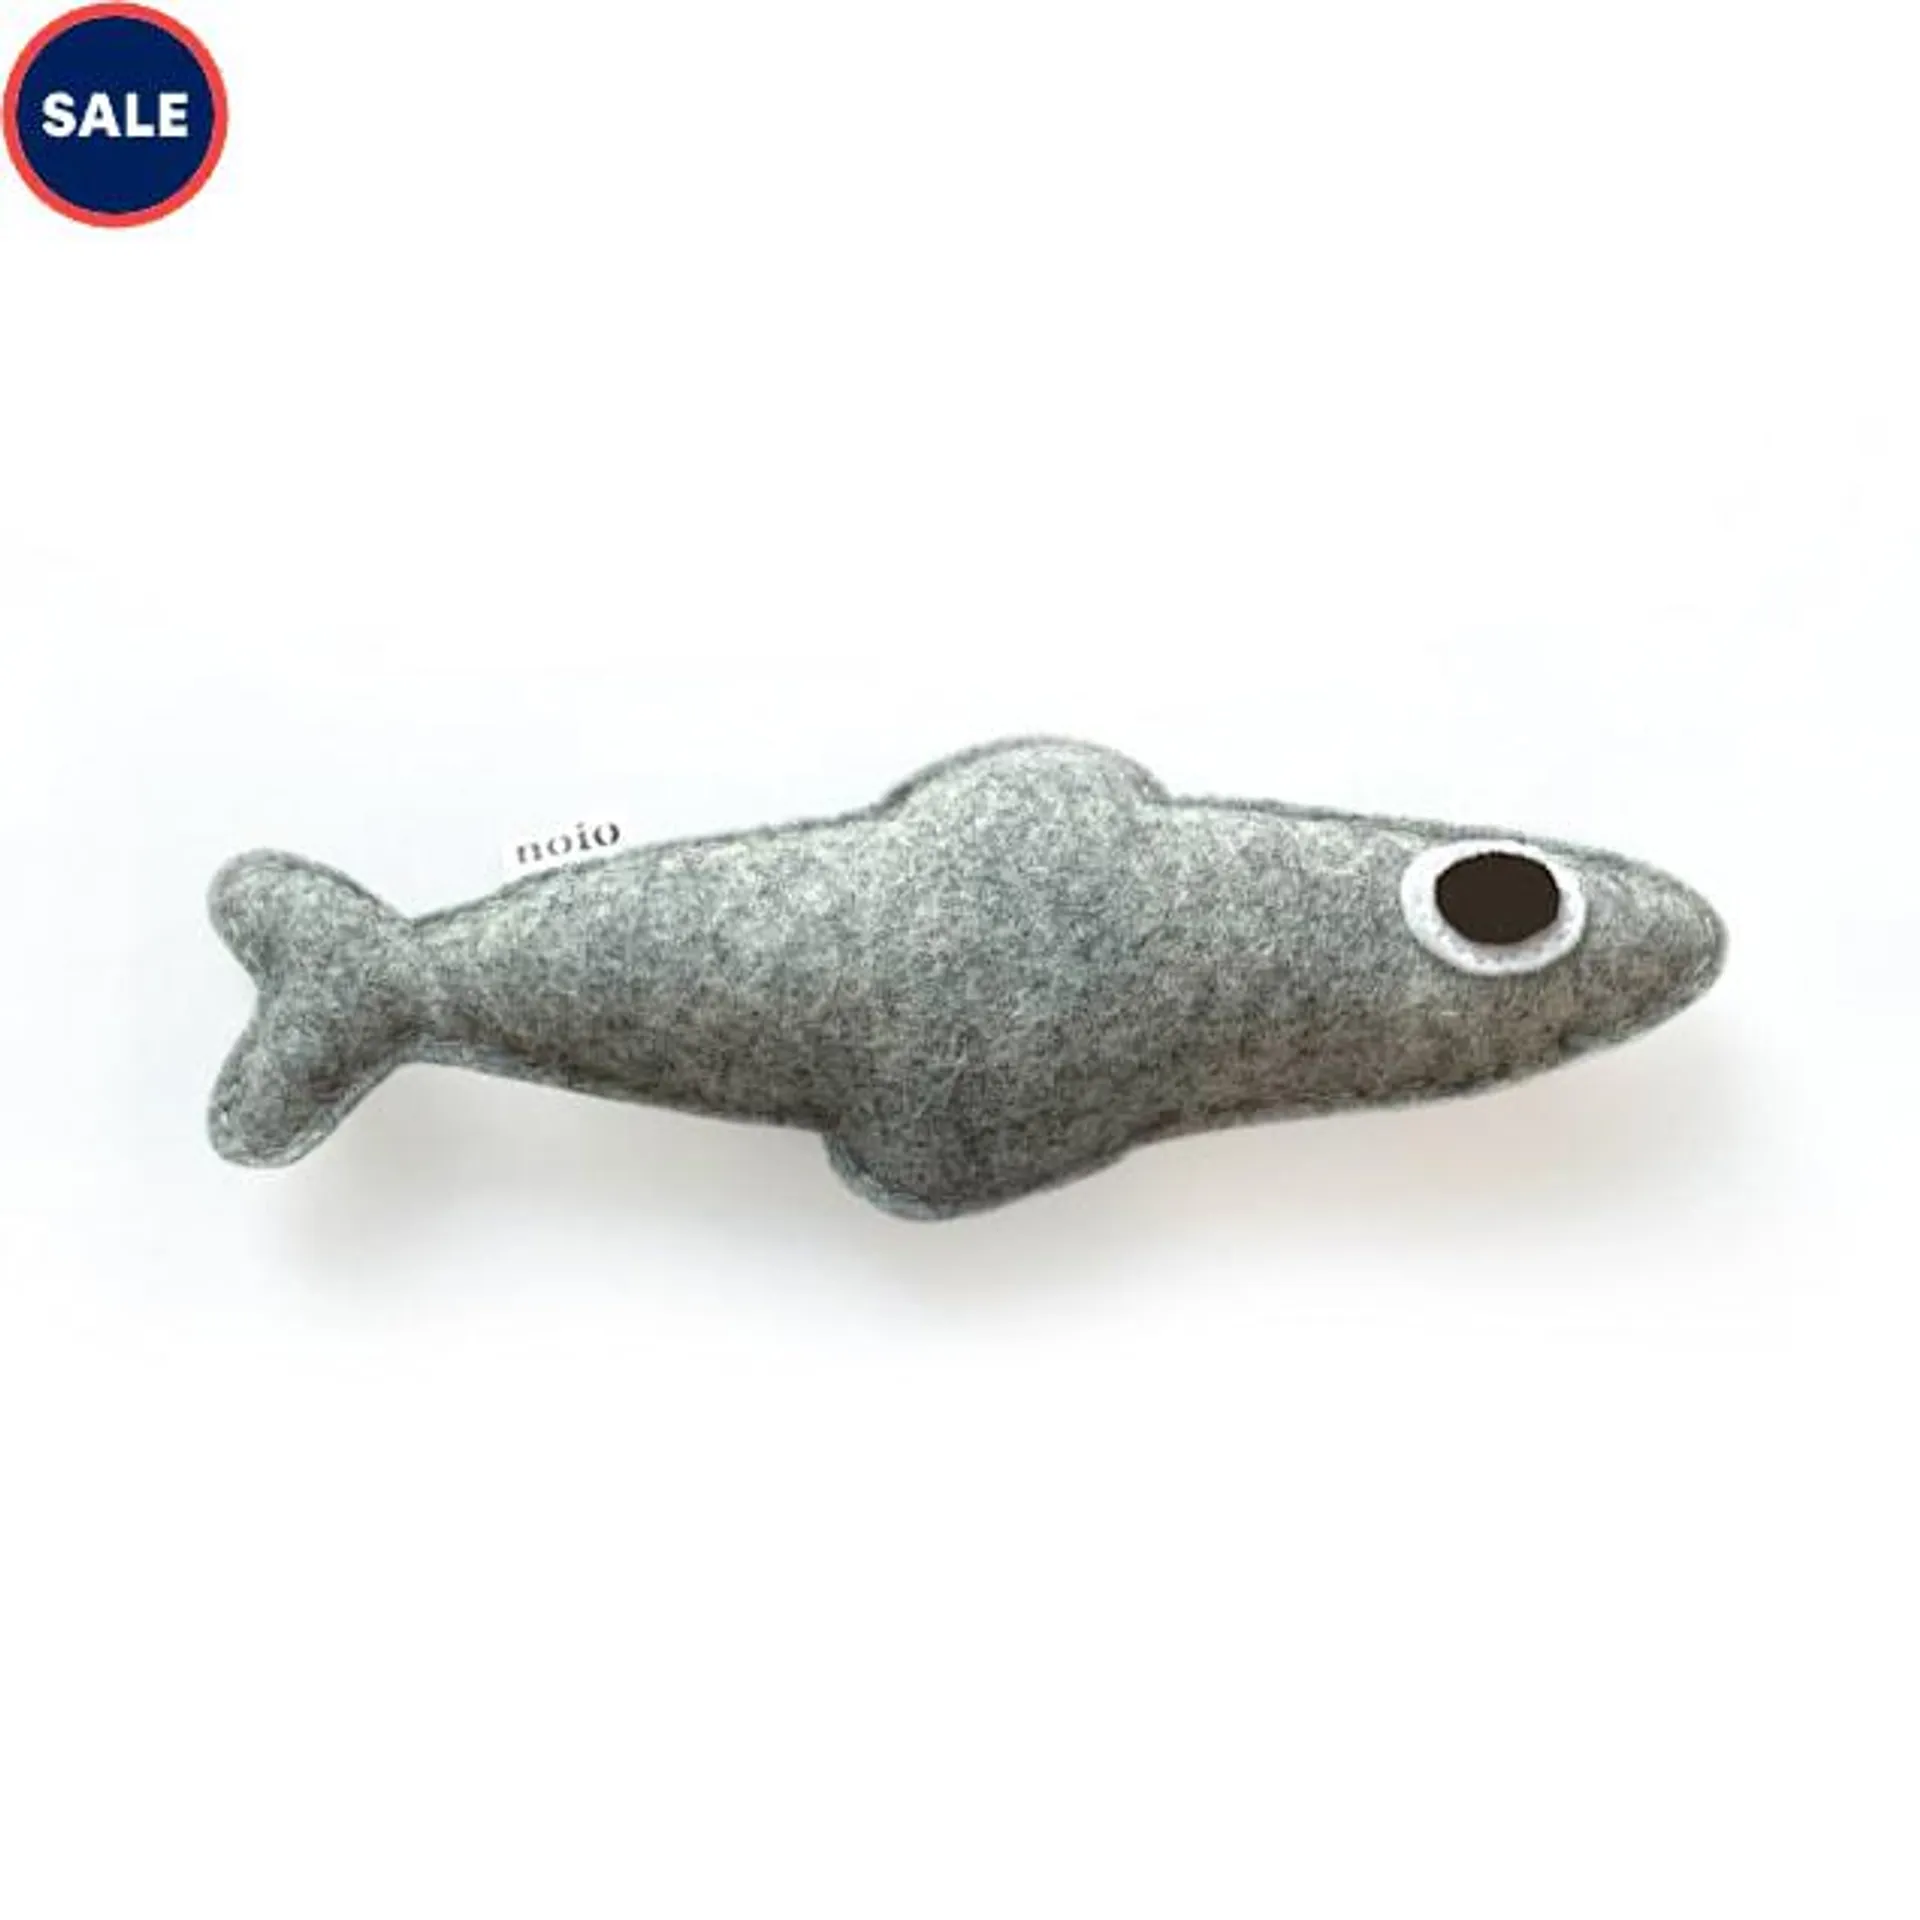 Pets So Good Grey Anchovy Cat Toy, Small